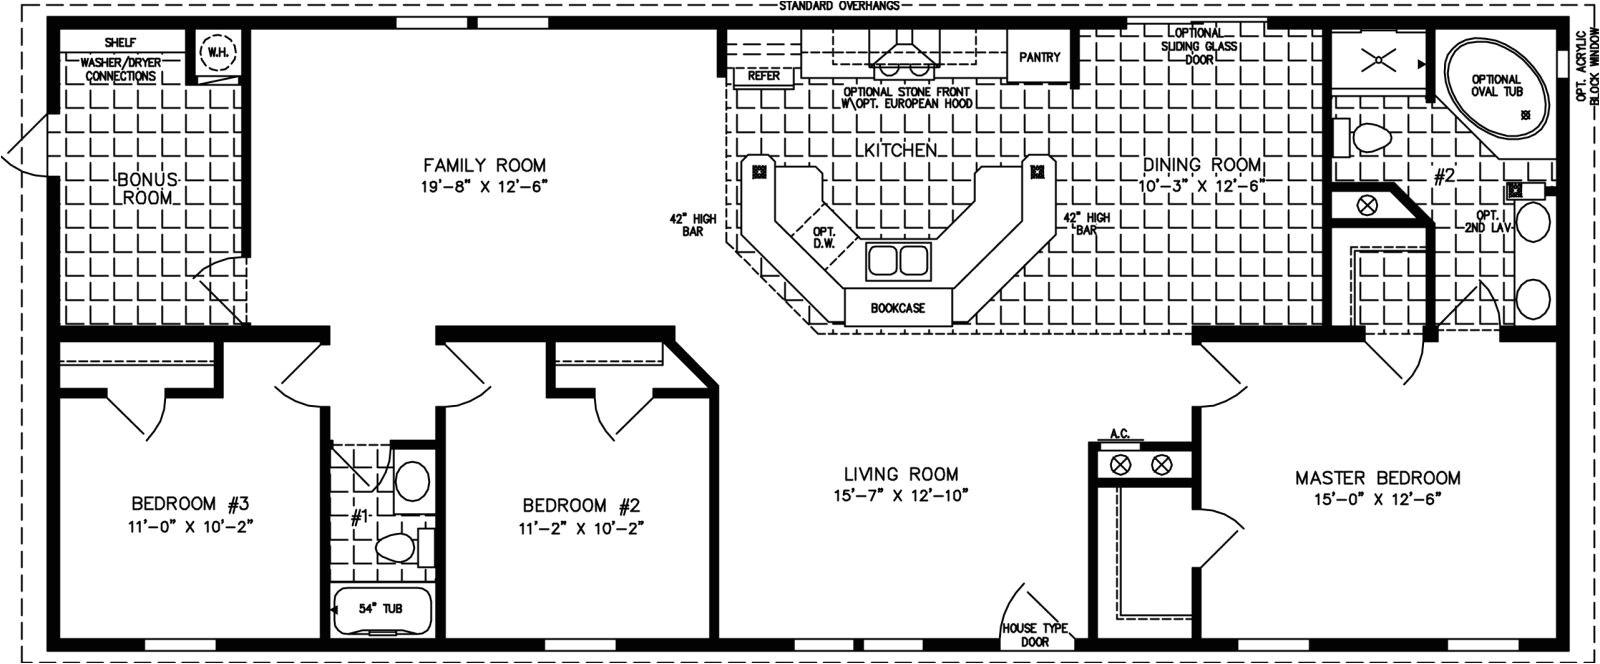 2700 sq ft ranch house plans